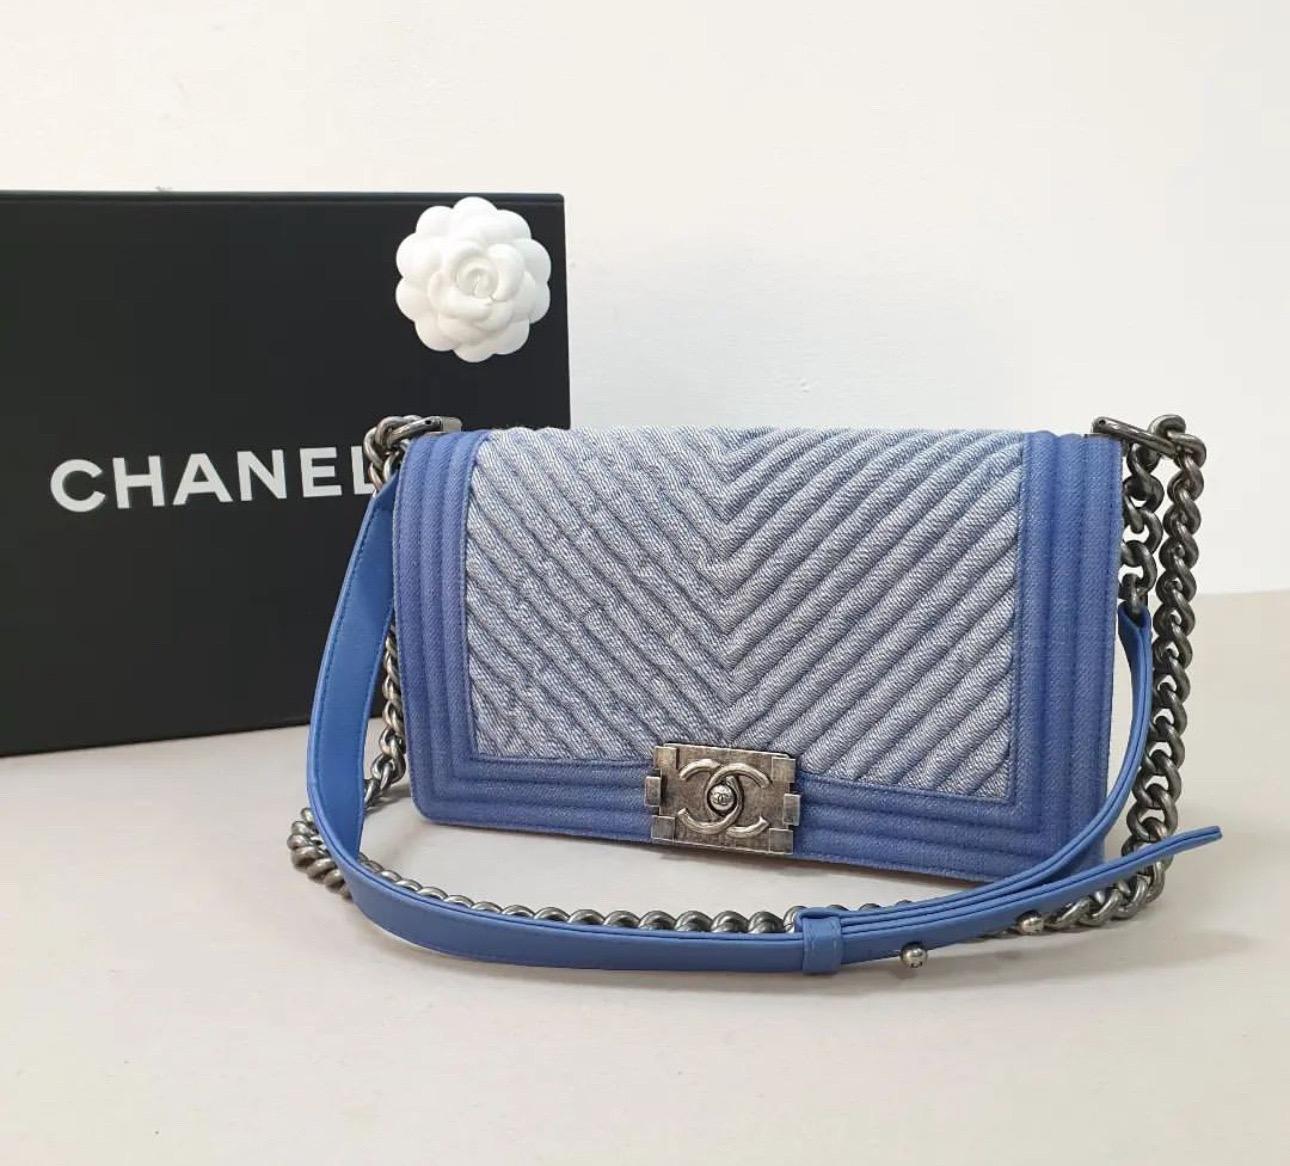 Chanel Boy Denim Chevron Small bag from 2019 spring collection

Very good condition


25*15*9cm